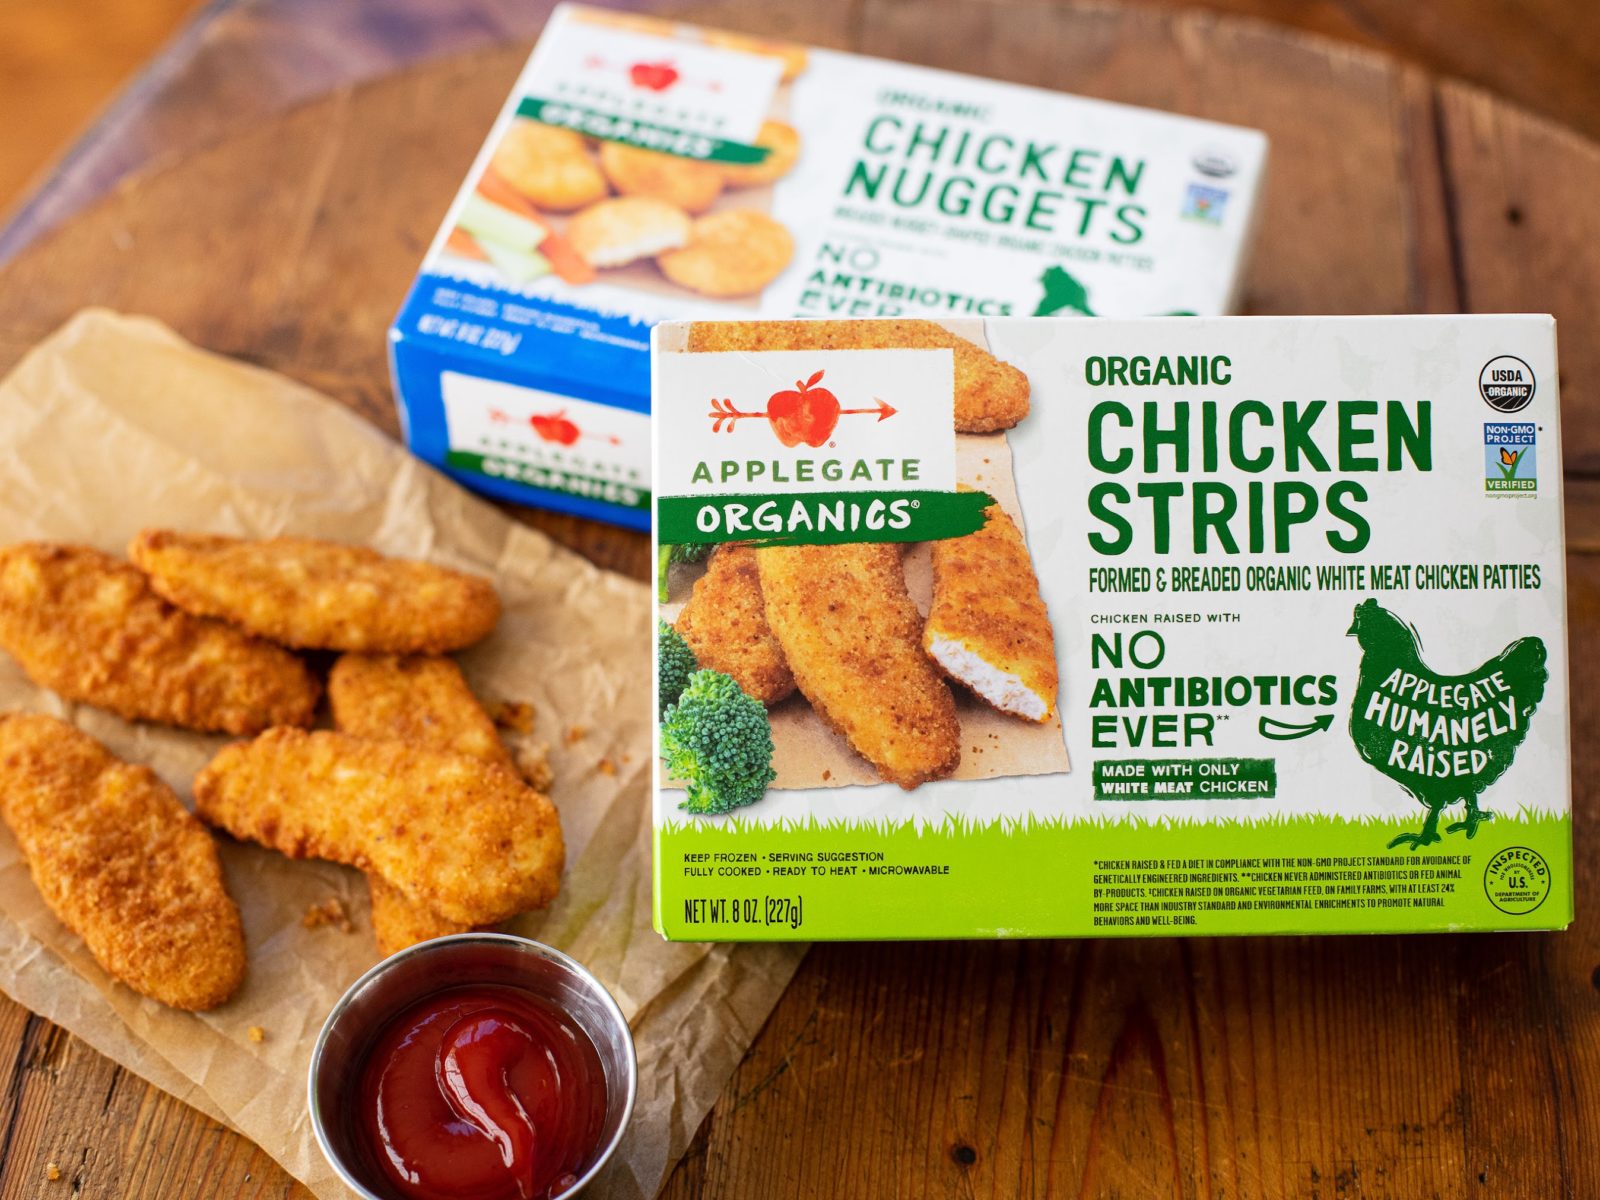 Get Applegate Organic Chicken Nuggets Or Strips Just $3.36 At Publix (Regular Price $8.79)